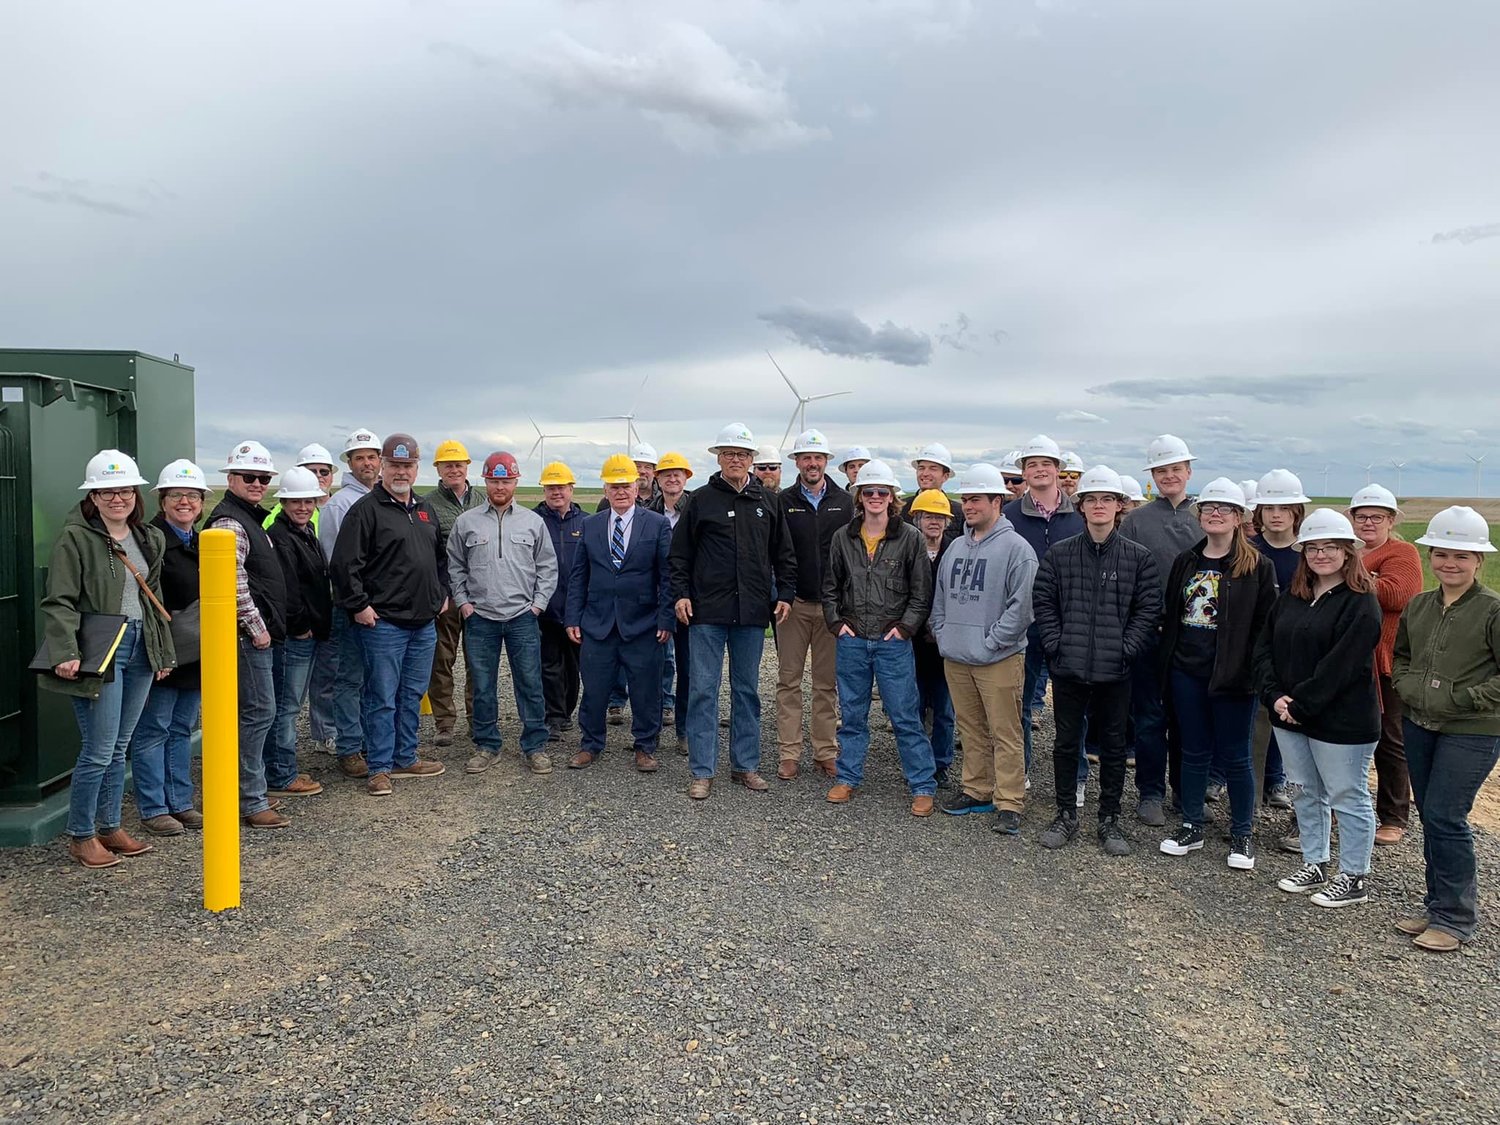 Washington State Governor Jay Inslee spent Wednesday on the East side of the Cascades in Moses Lake and Ritzville to talk about renewable energy and wildlife conservation.